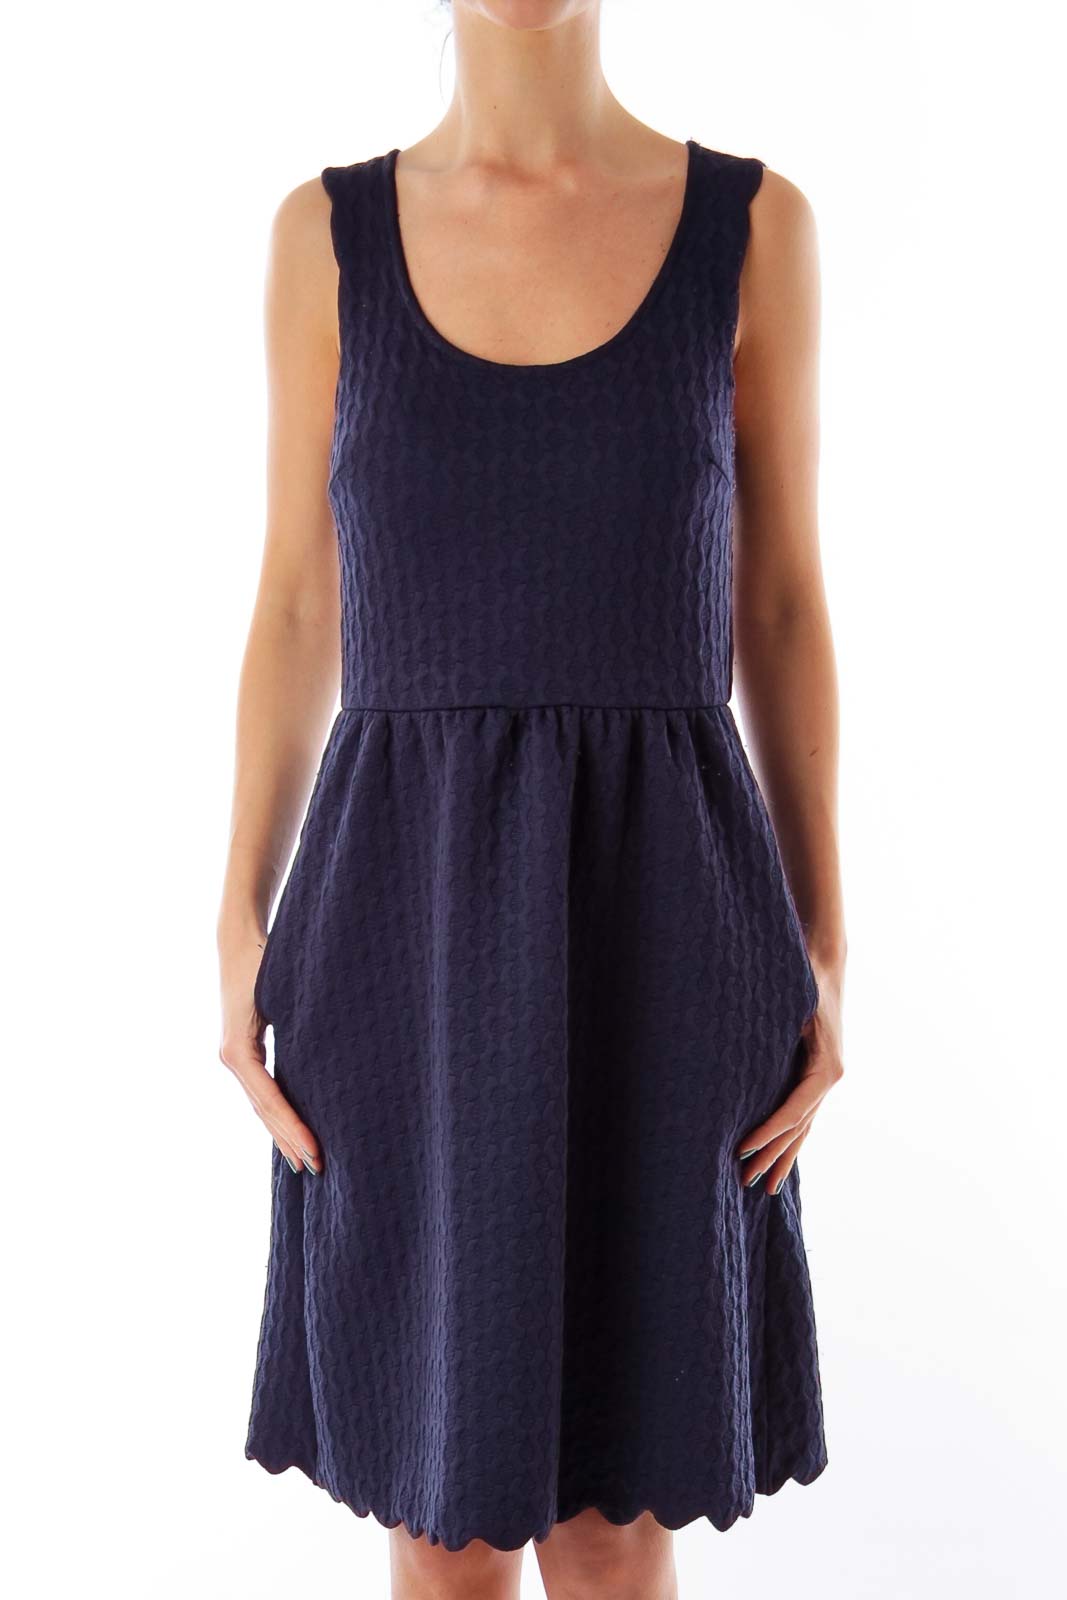 Navy Scalloped Dress Front